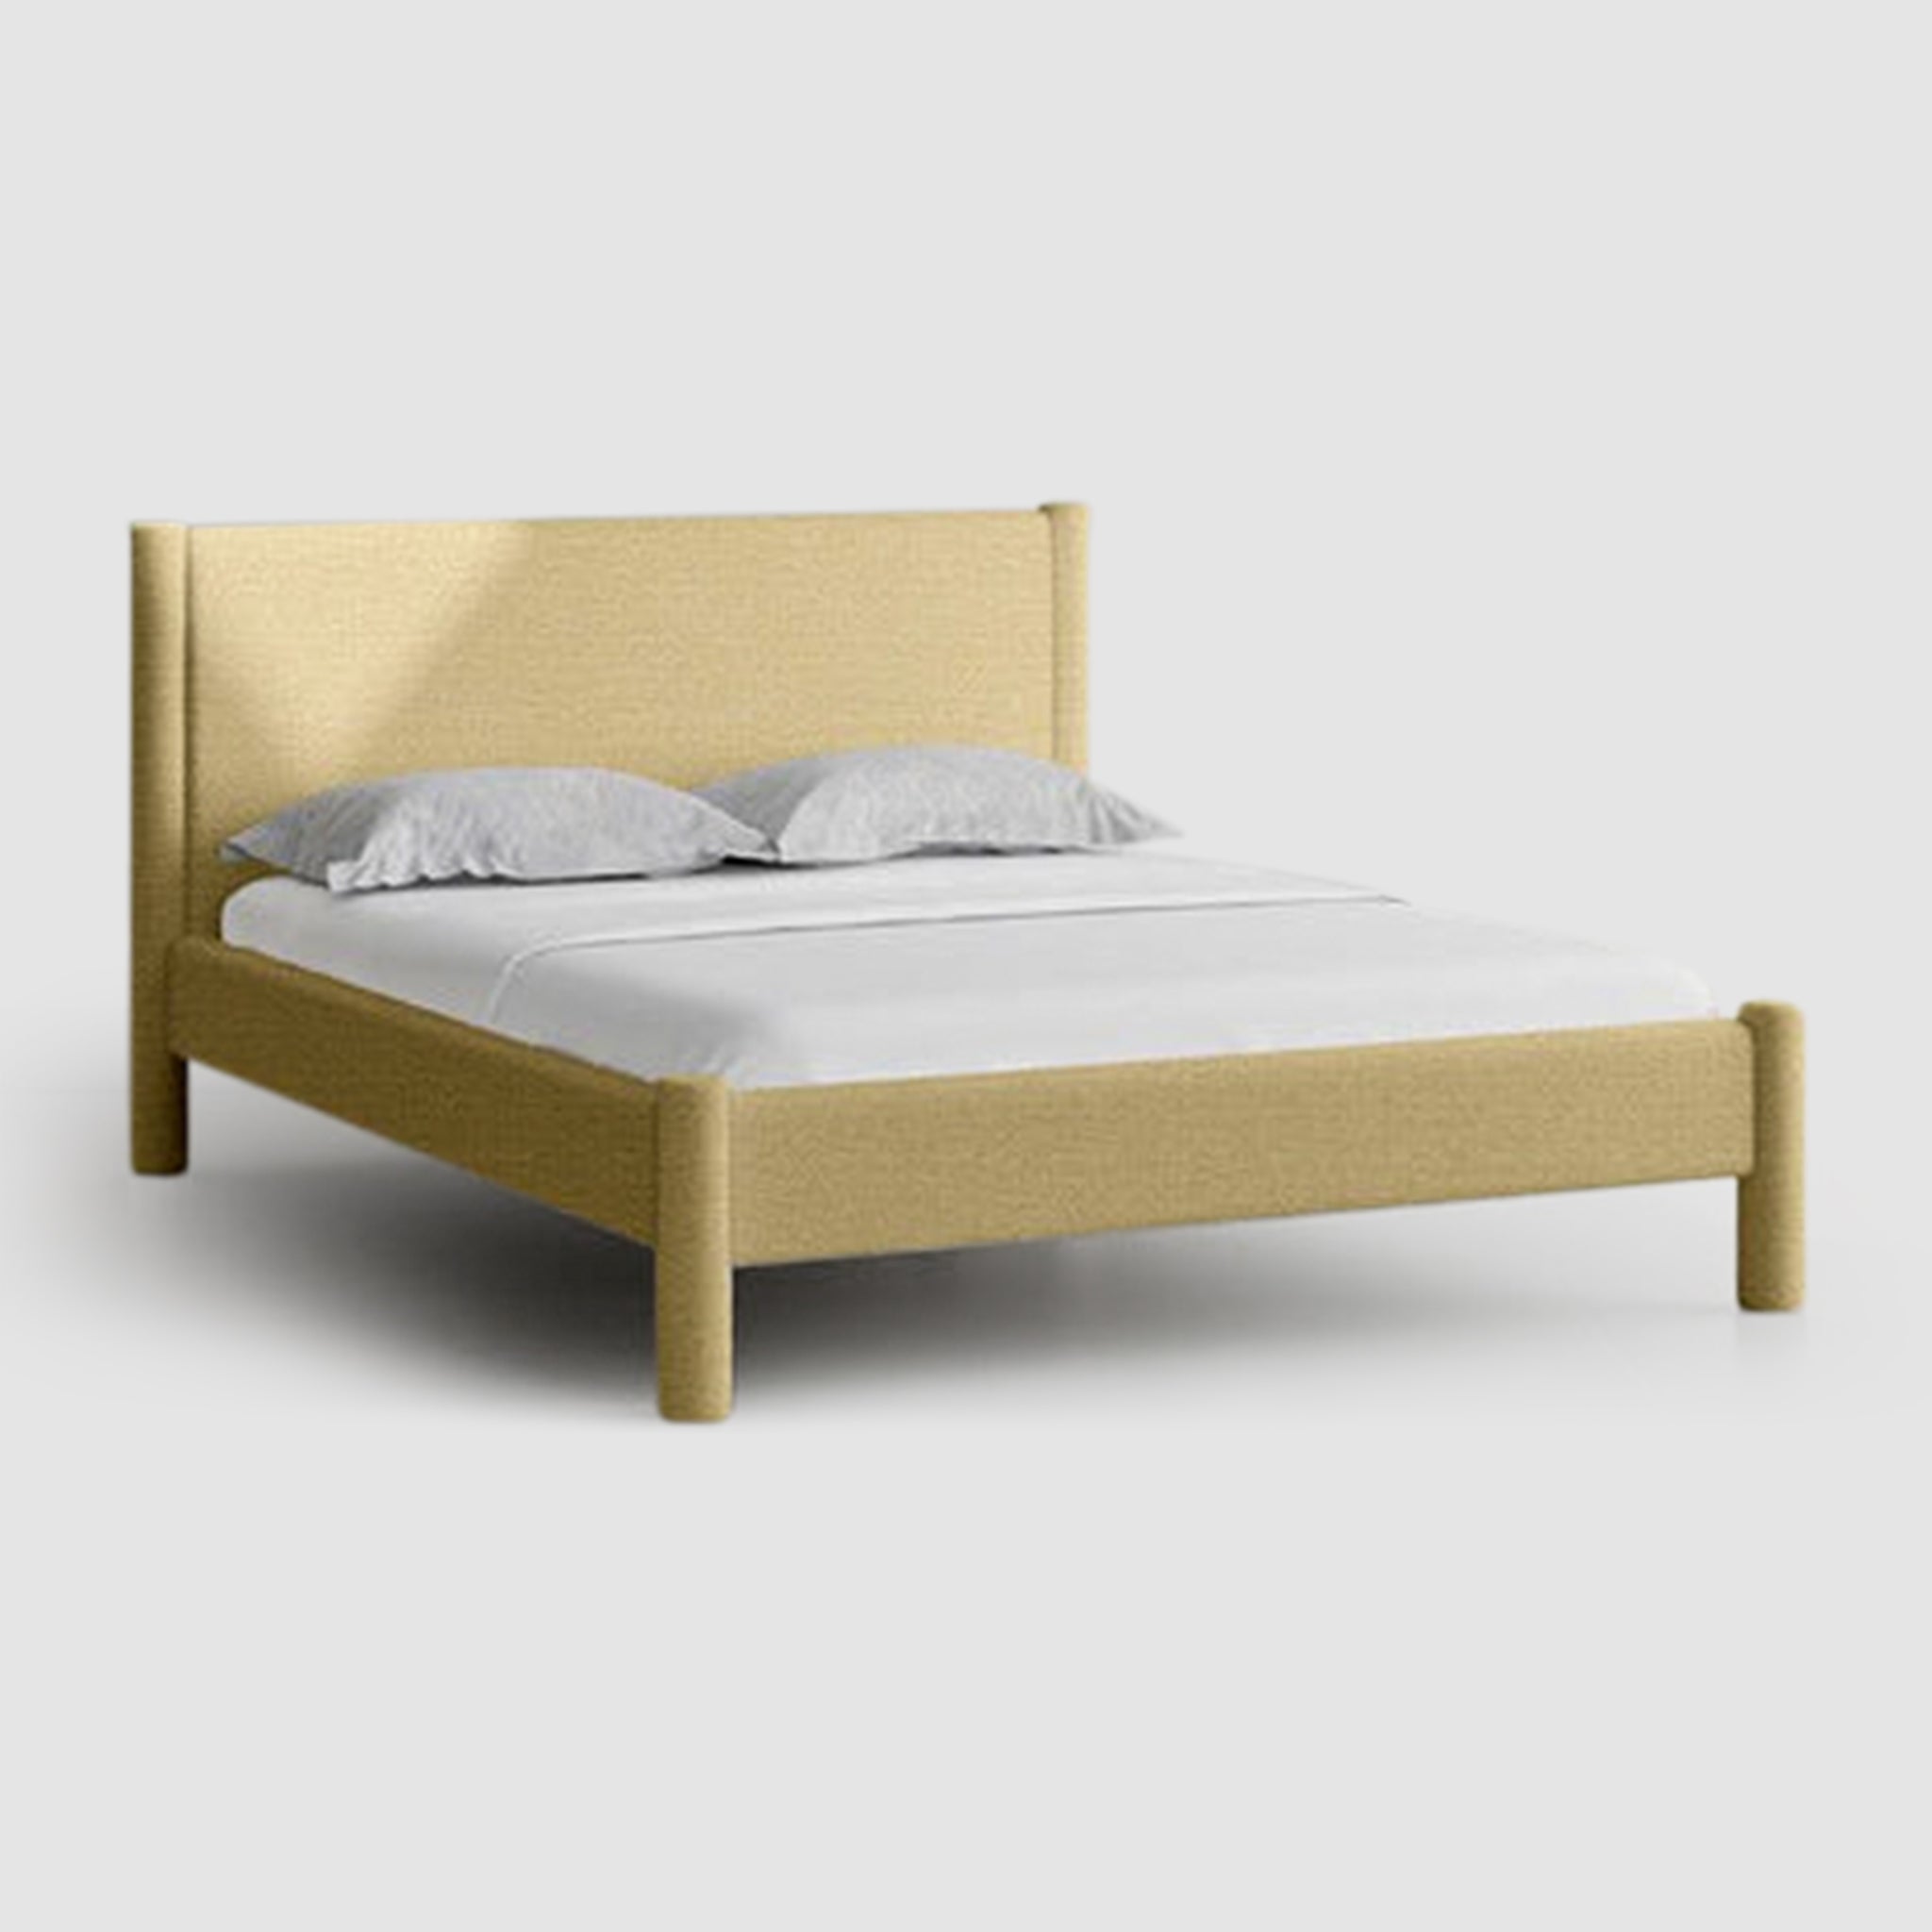 The Carrie Bed with modern design and solid wood frame for sturdy support